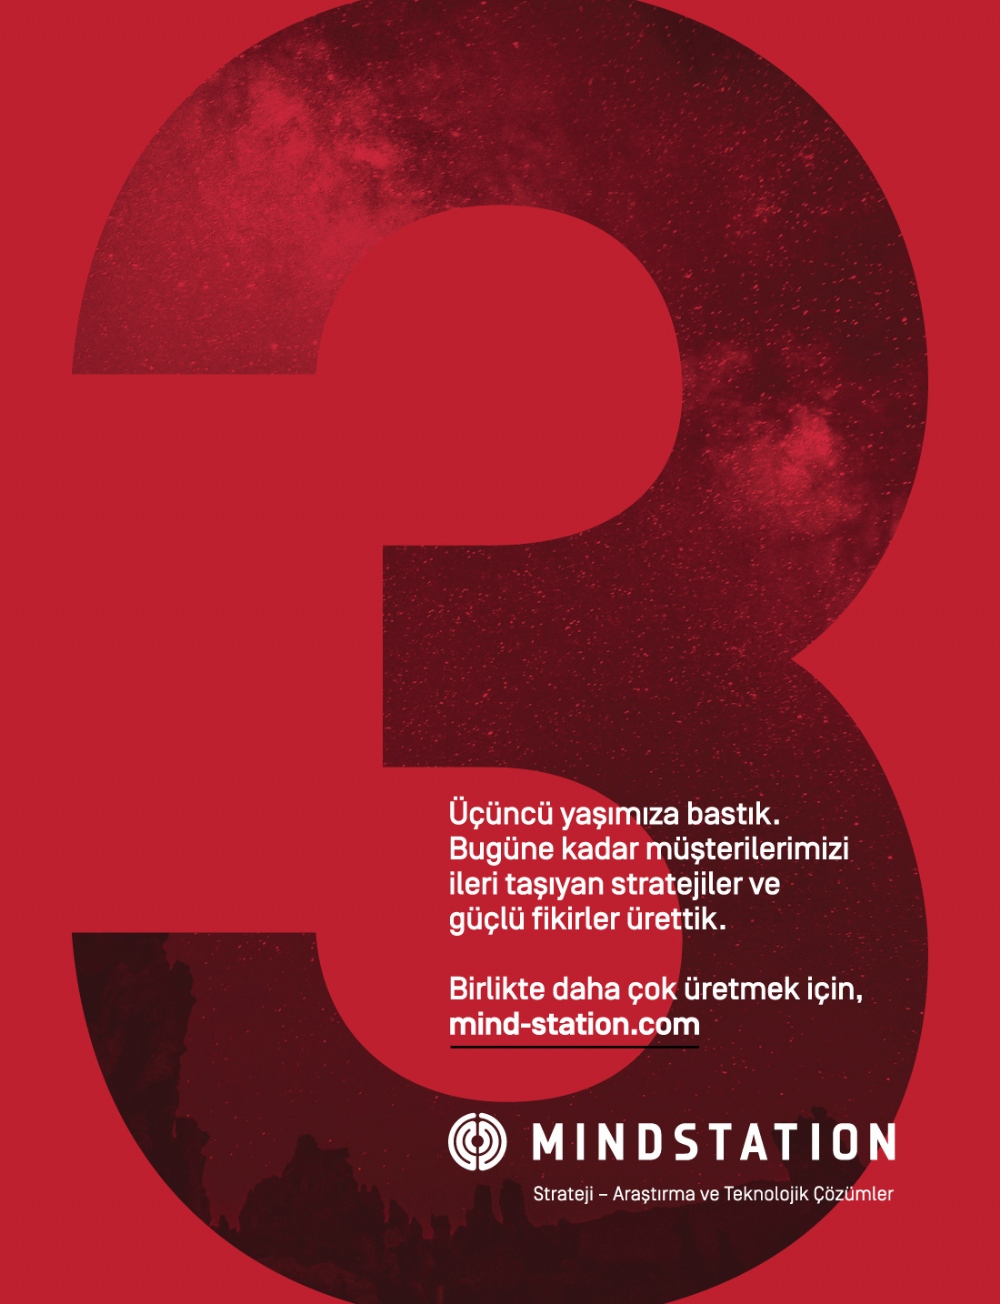 MindStation is 3 Years Old